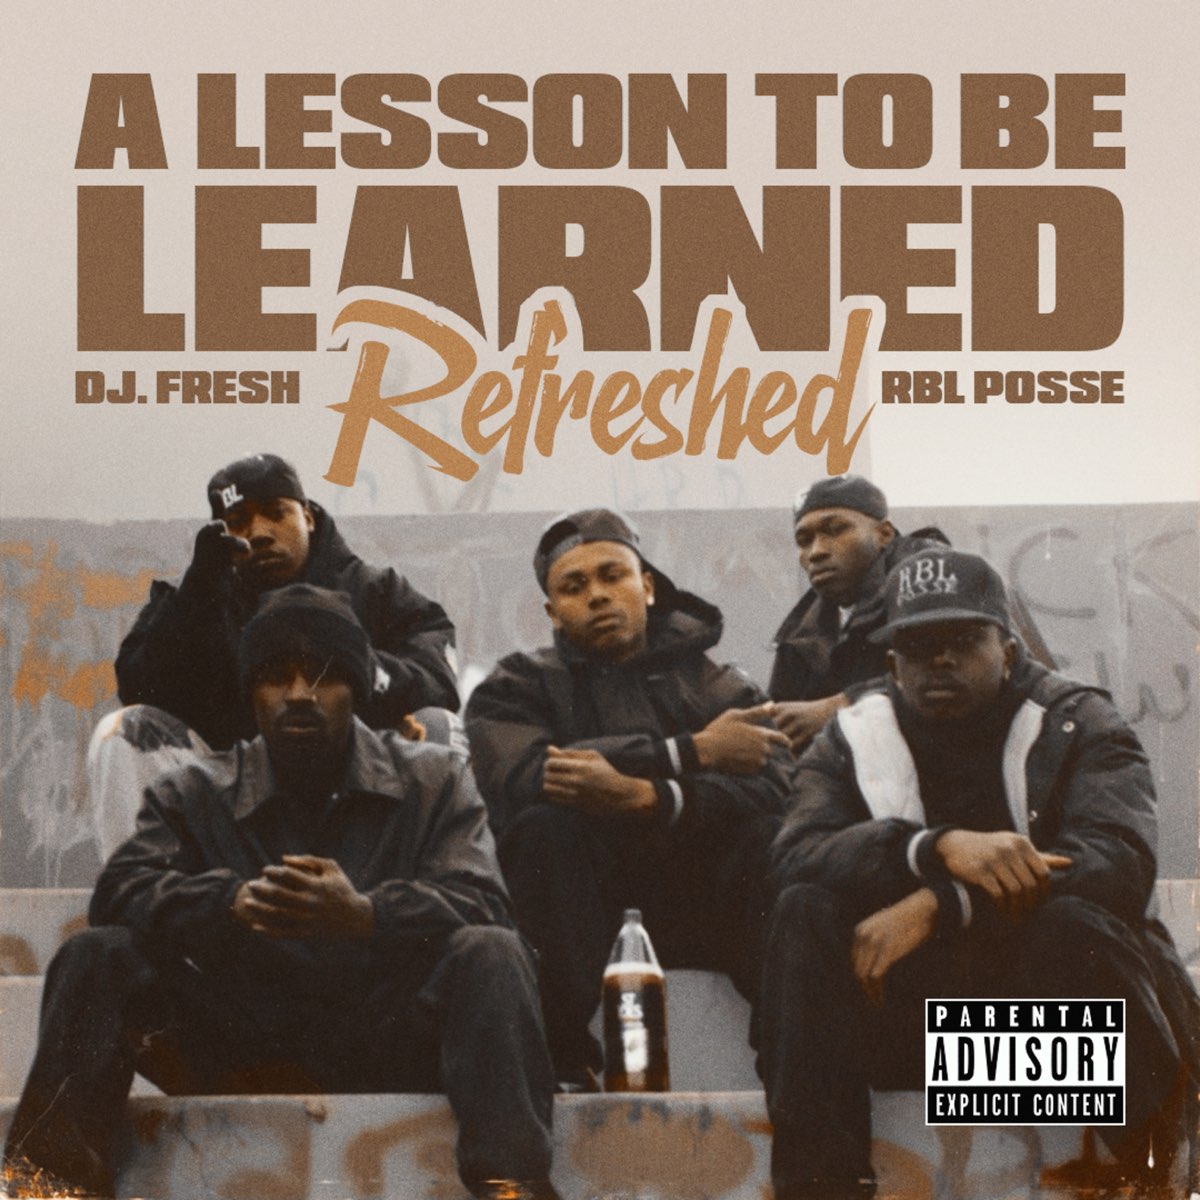 R.b.l. posse a lesson to be learned